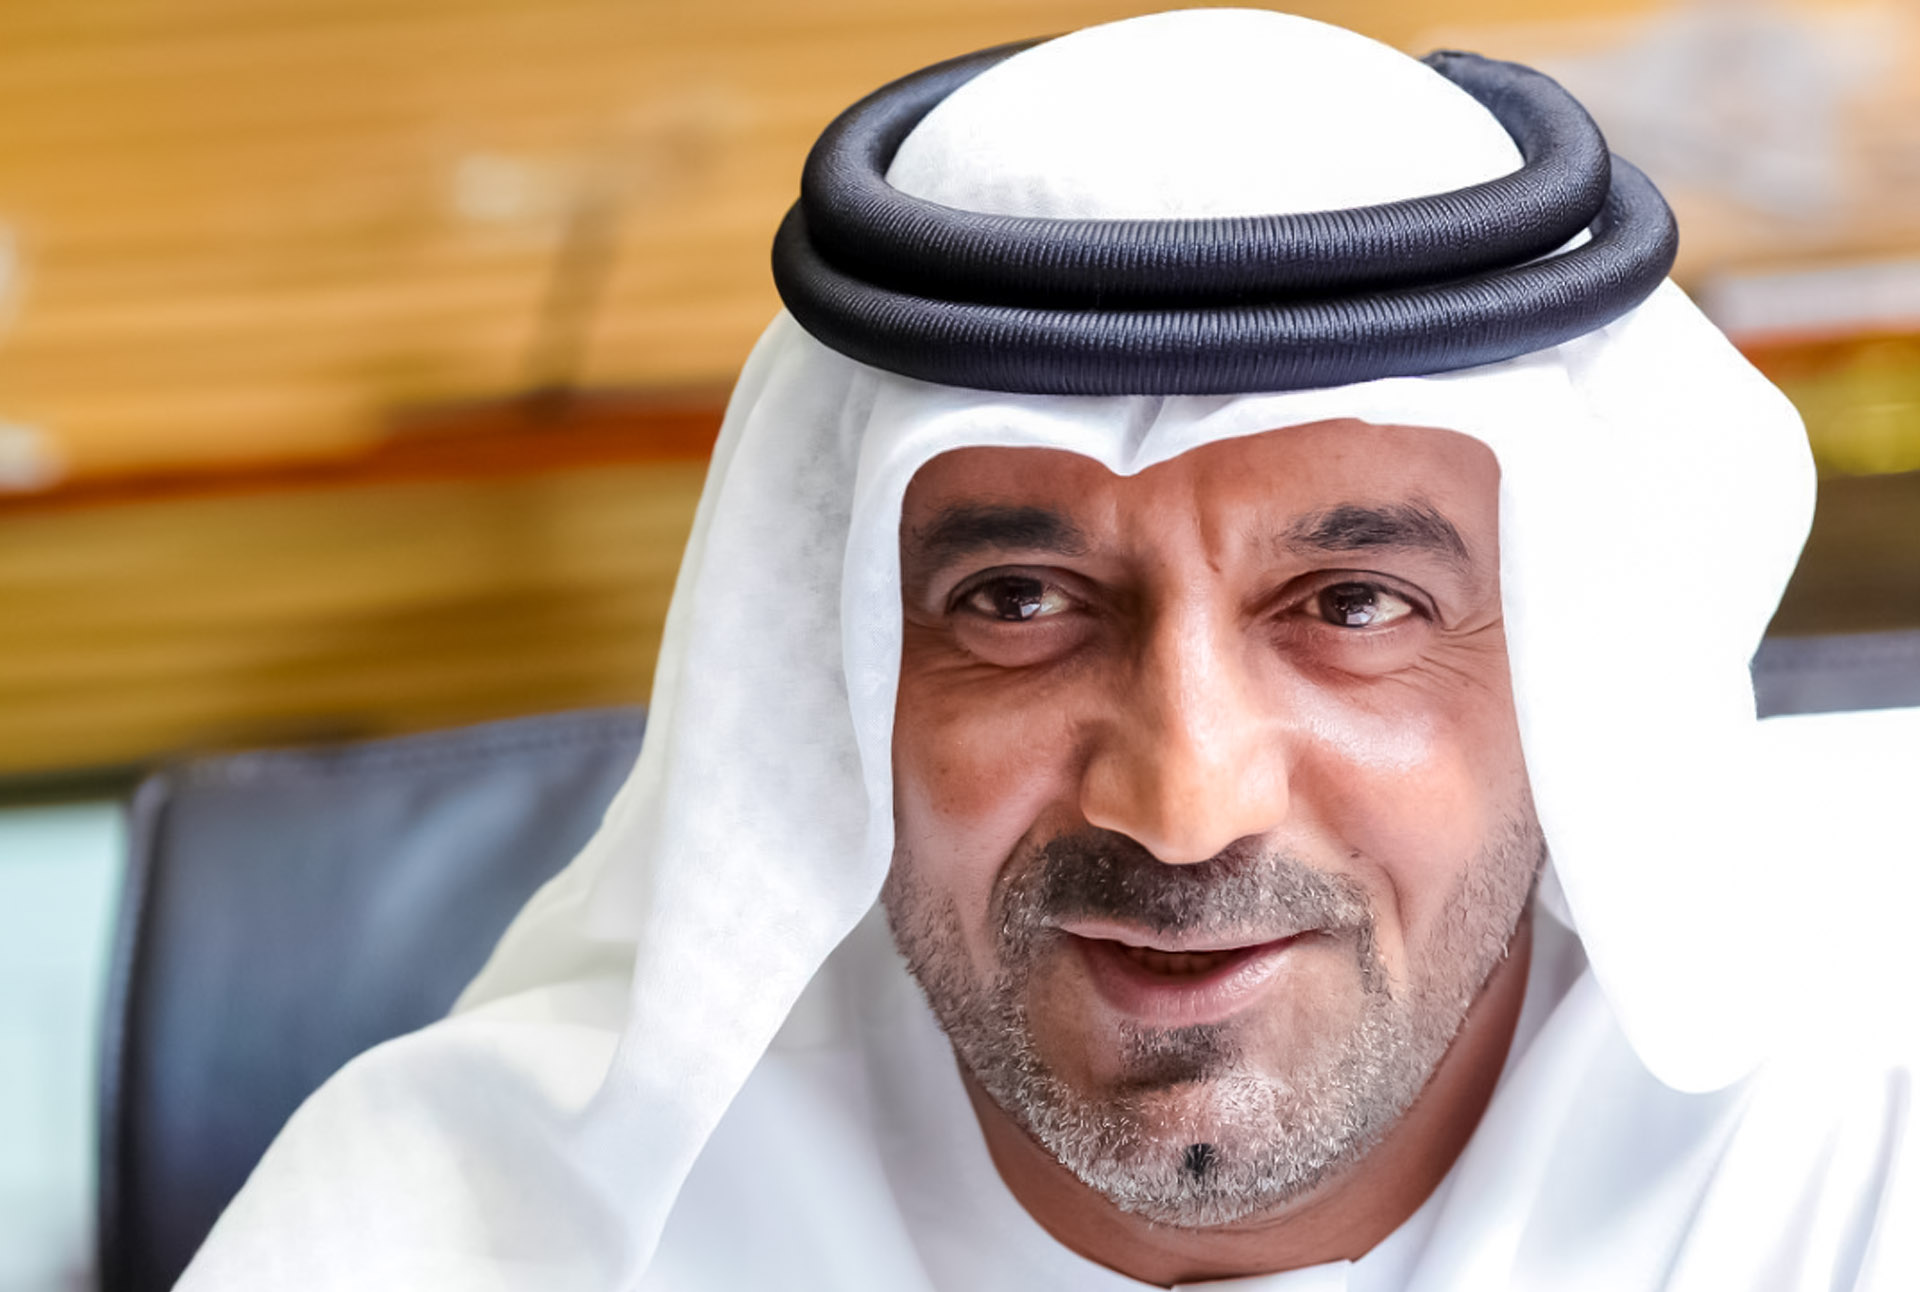 Dubai GDP to gain AED250 billion from free zones by 2030